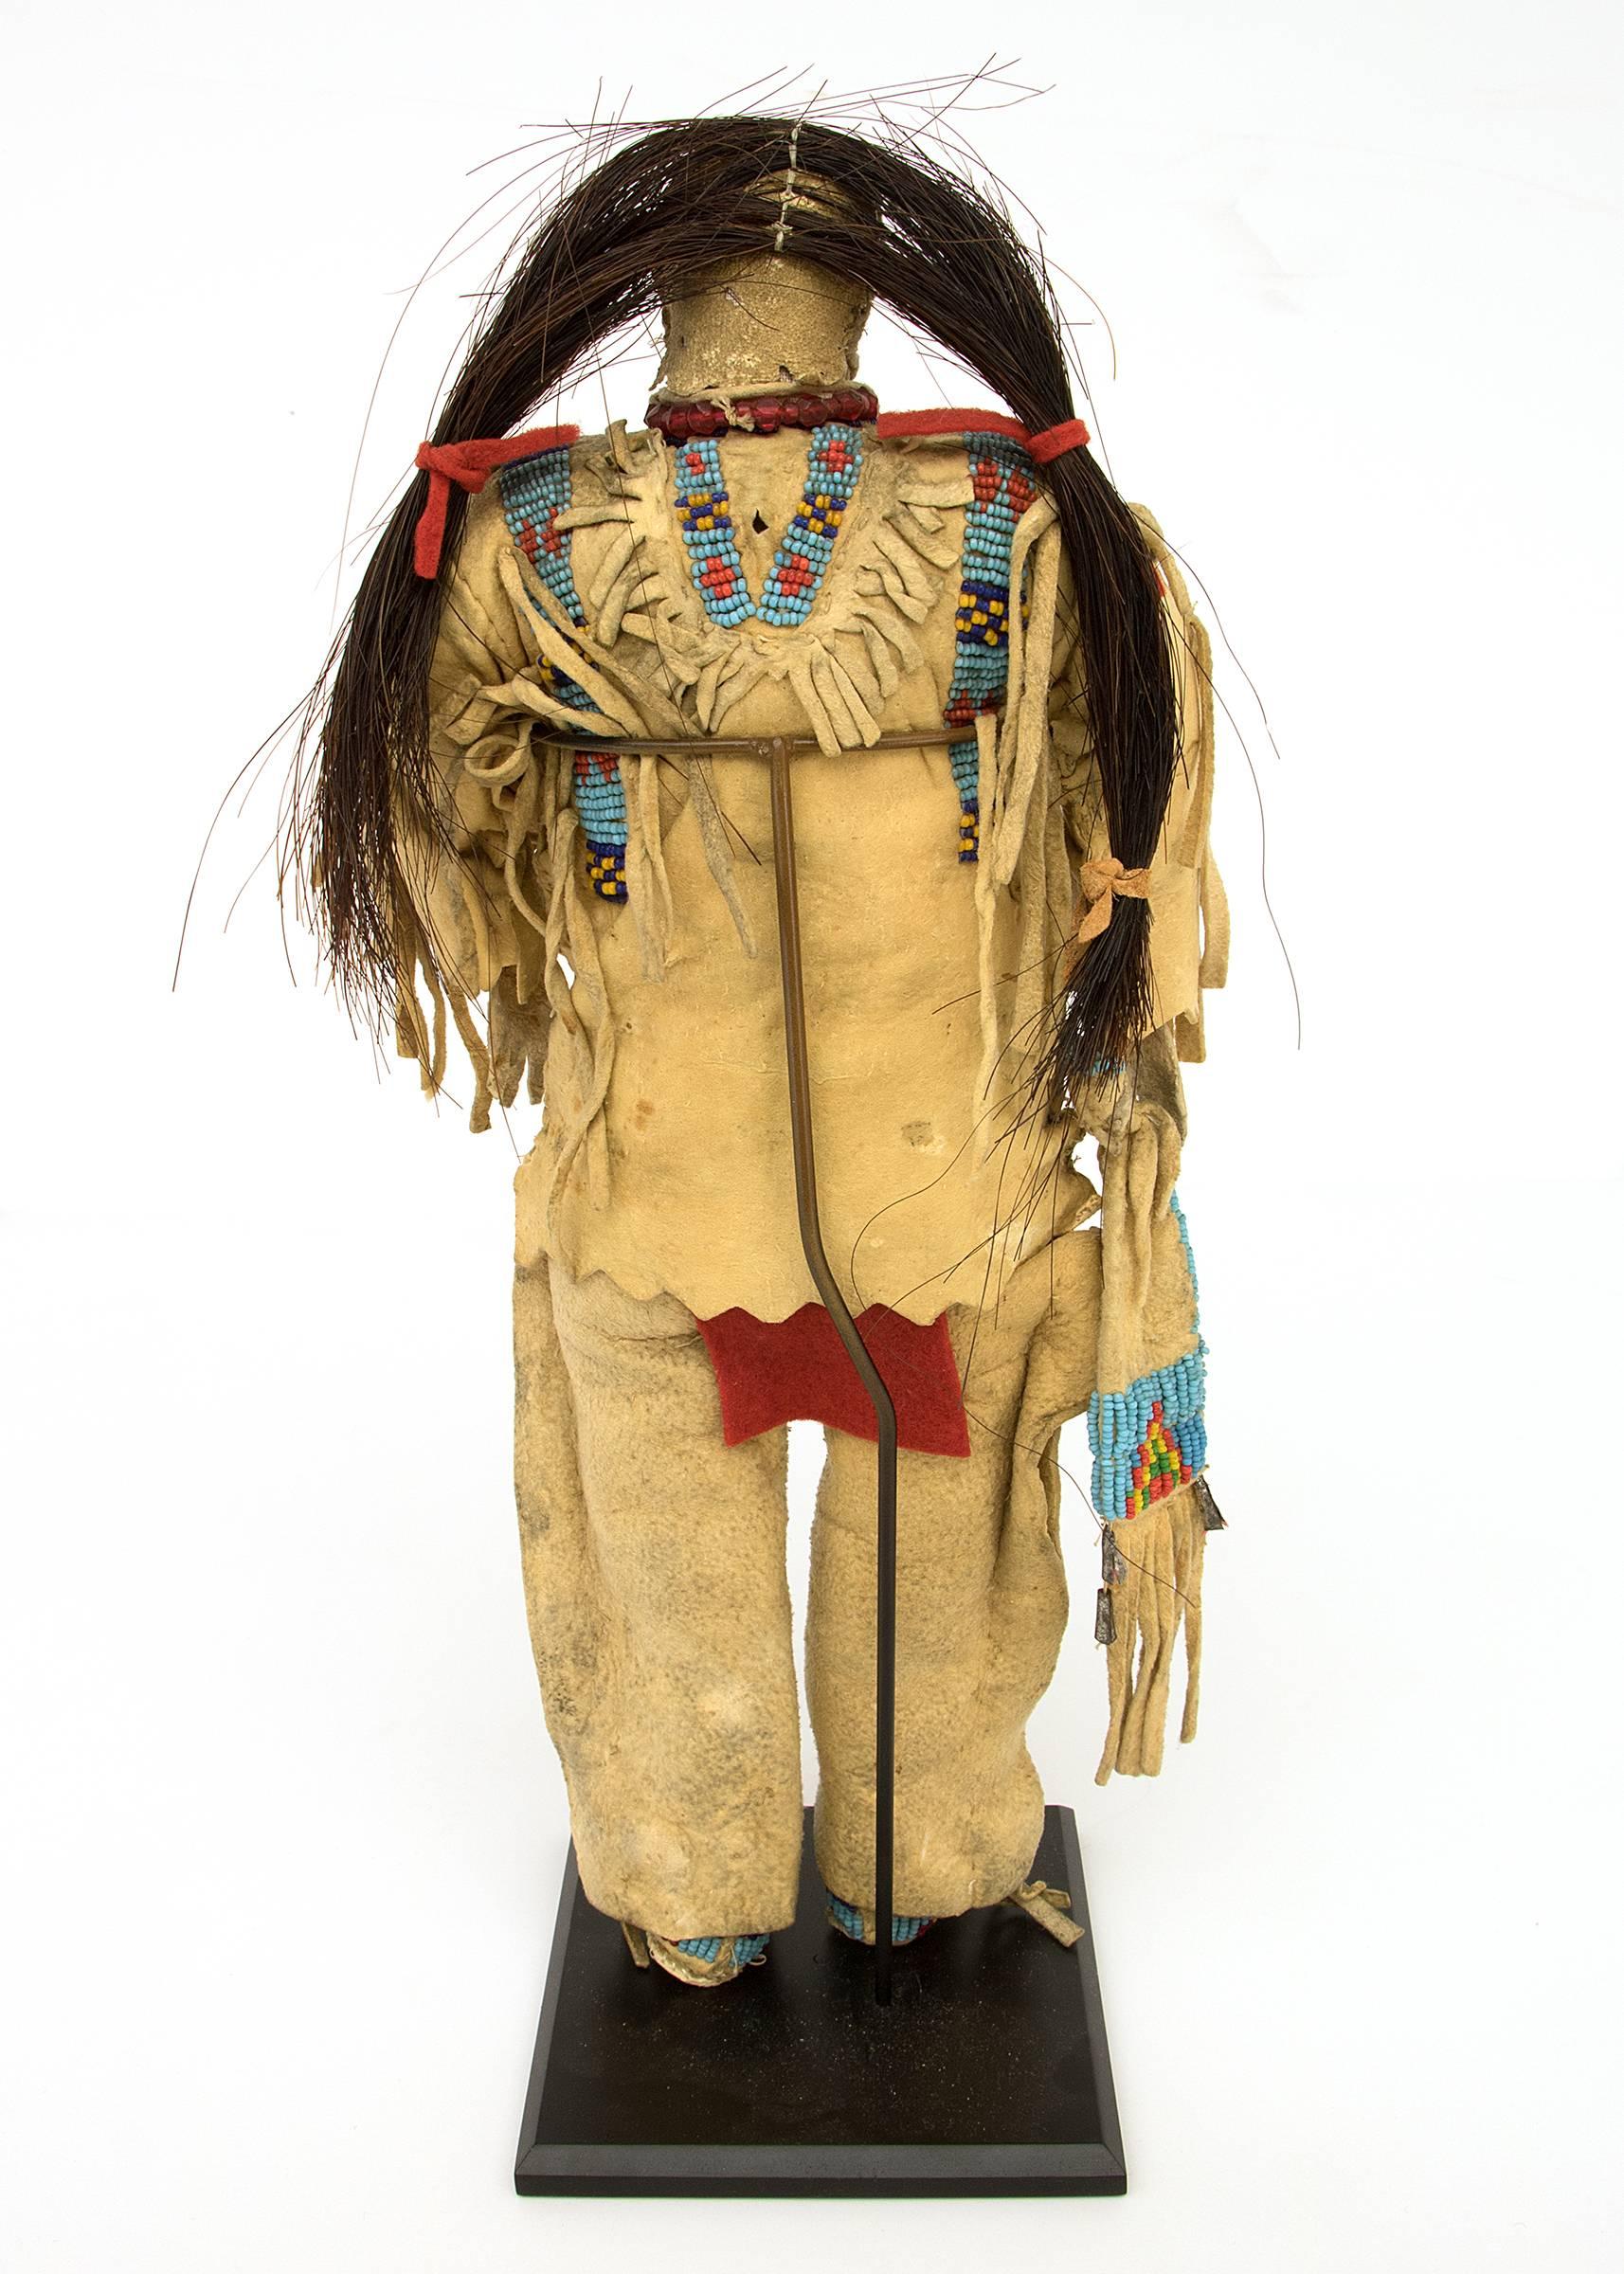 Dolls such as this were created as playthings for young girls. Formed out of native tanned hide and likely stuffed with grass, the doll is a replica of a Sioux warrior and the clothing and accessories denote that this was made by and for a member of